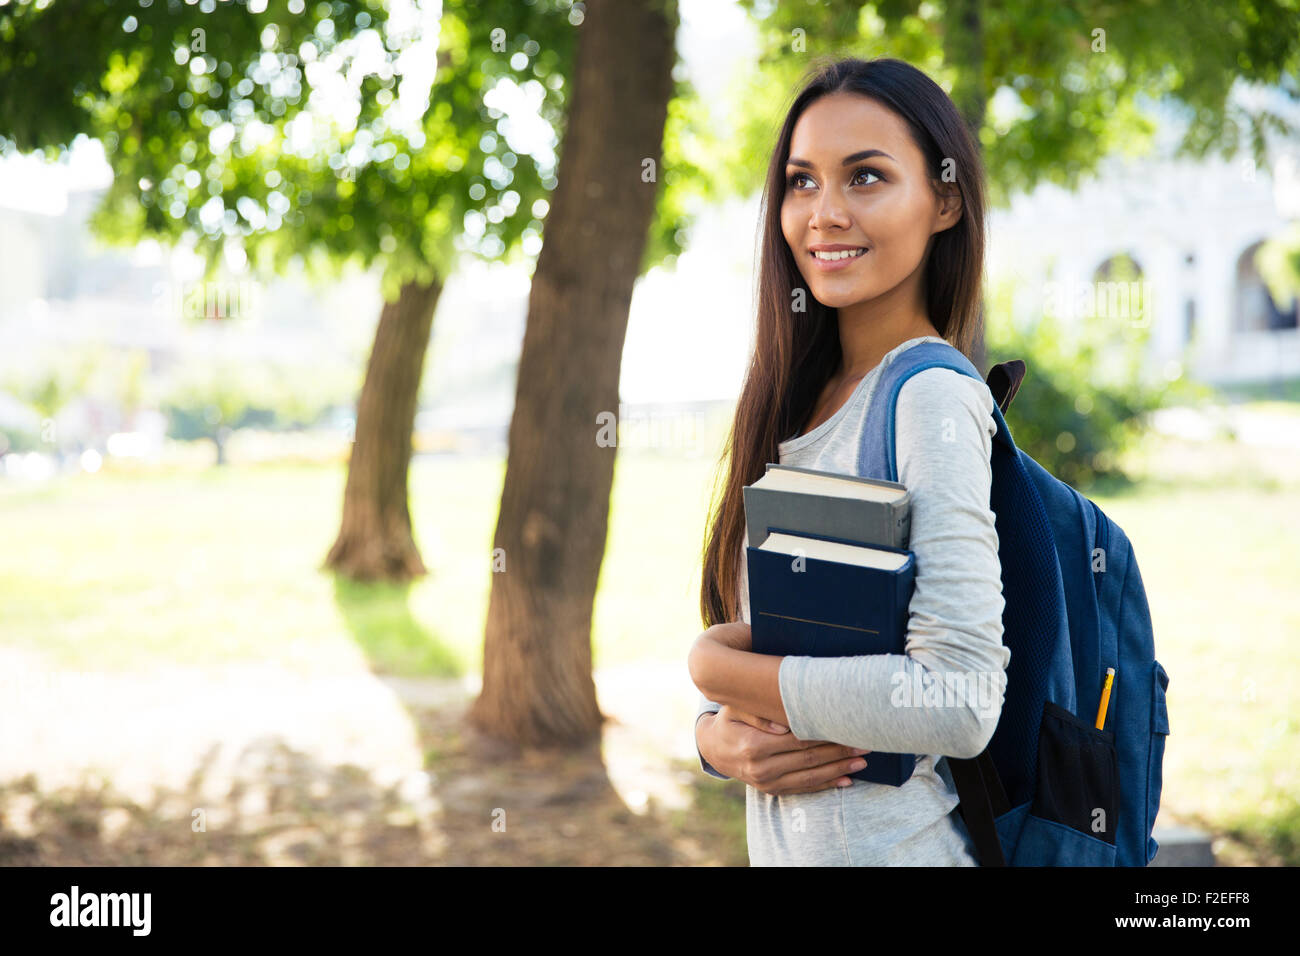 Portrait of a smiling female student walking outdoors Stock Photo